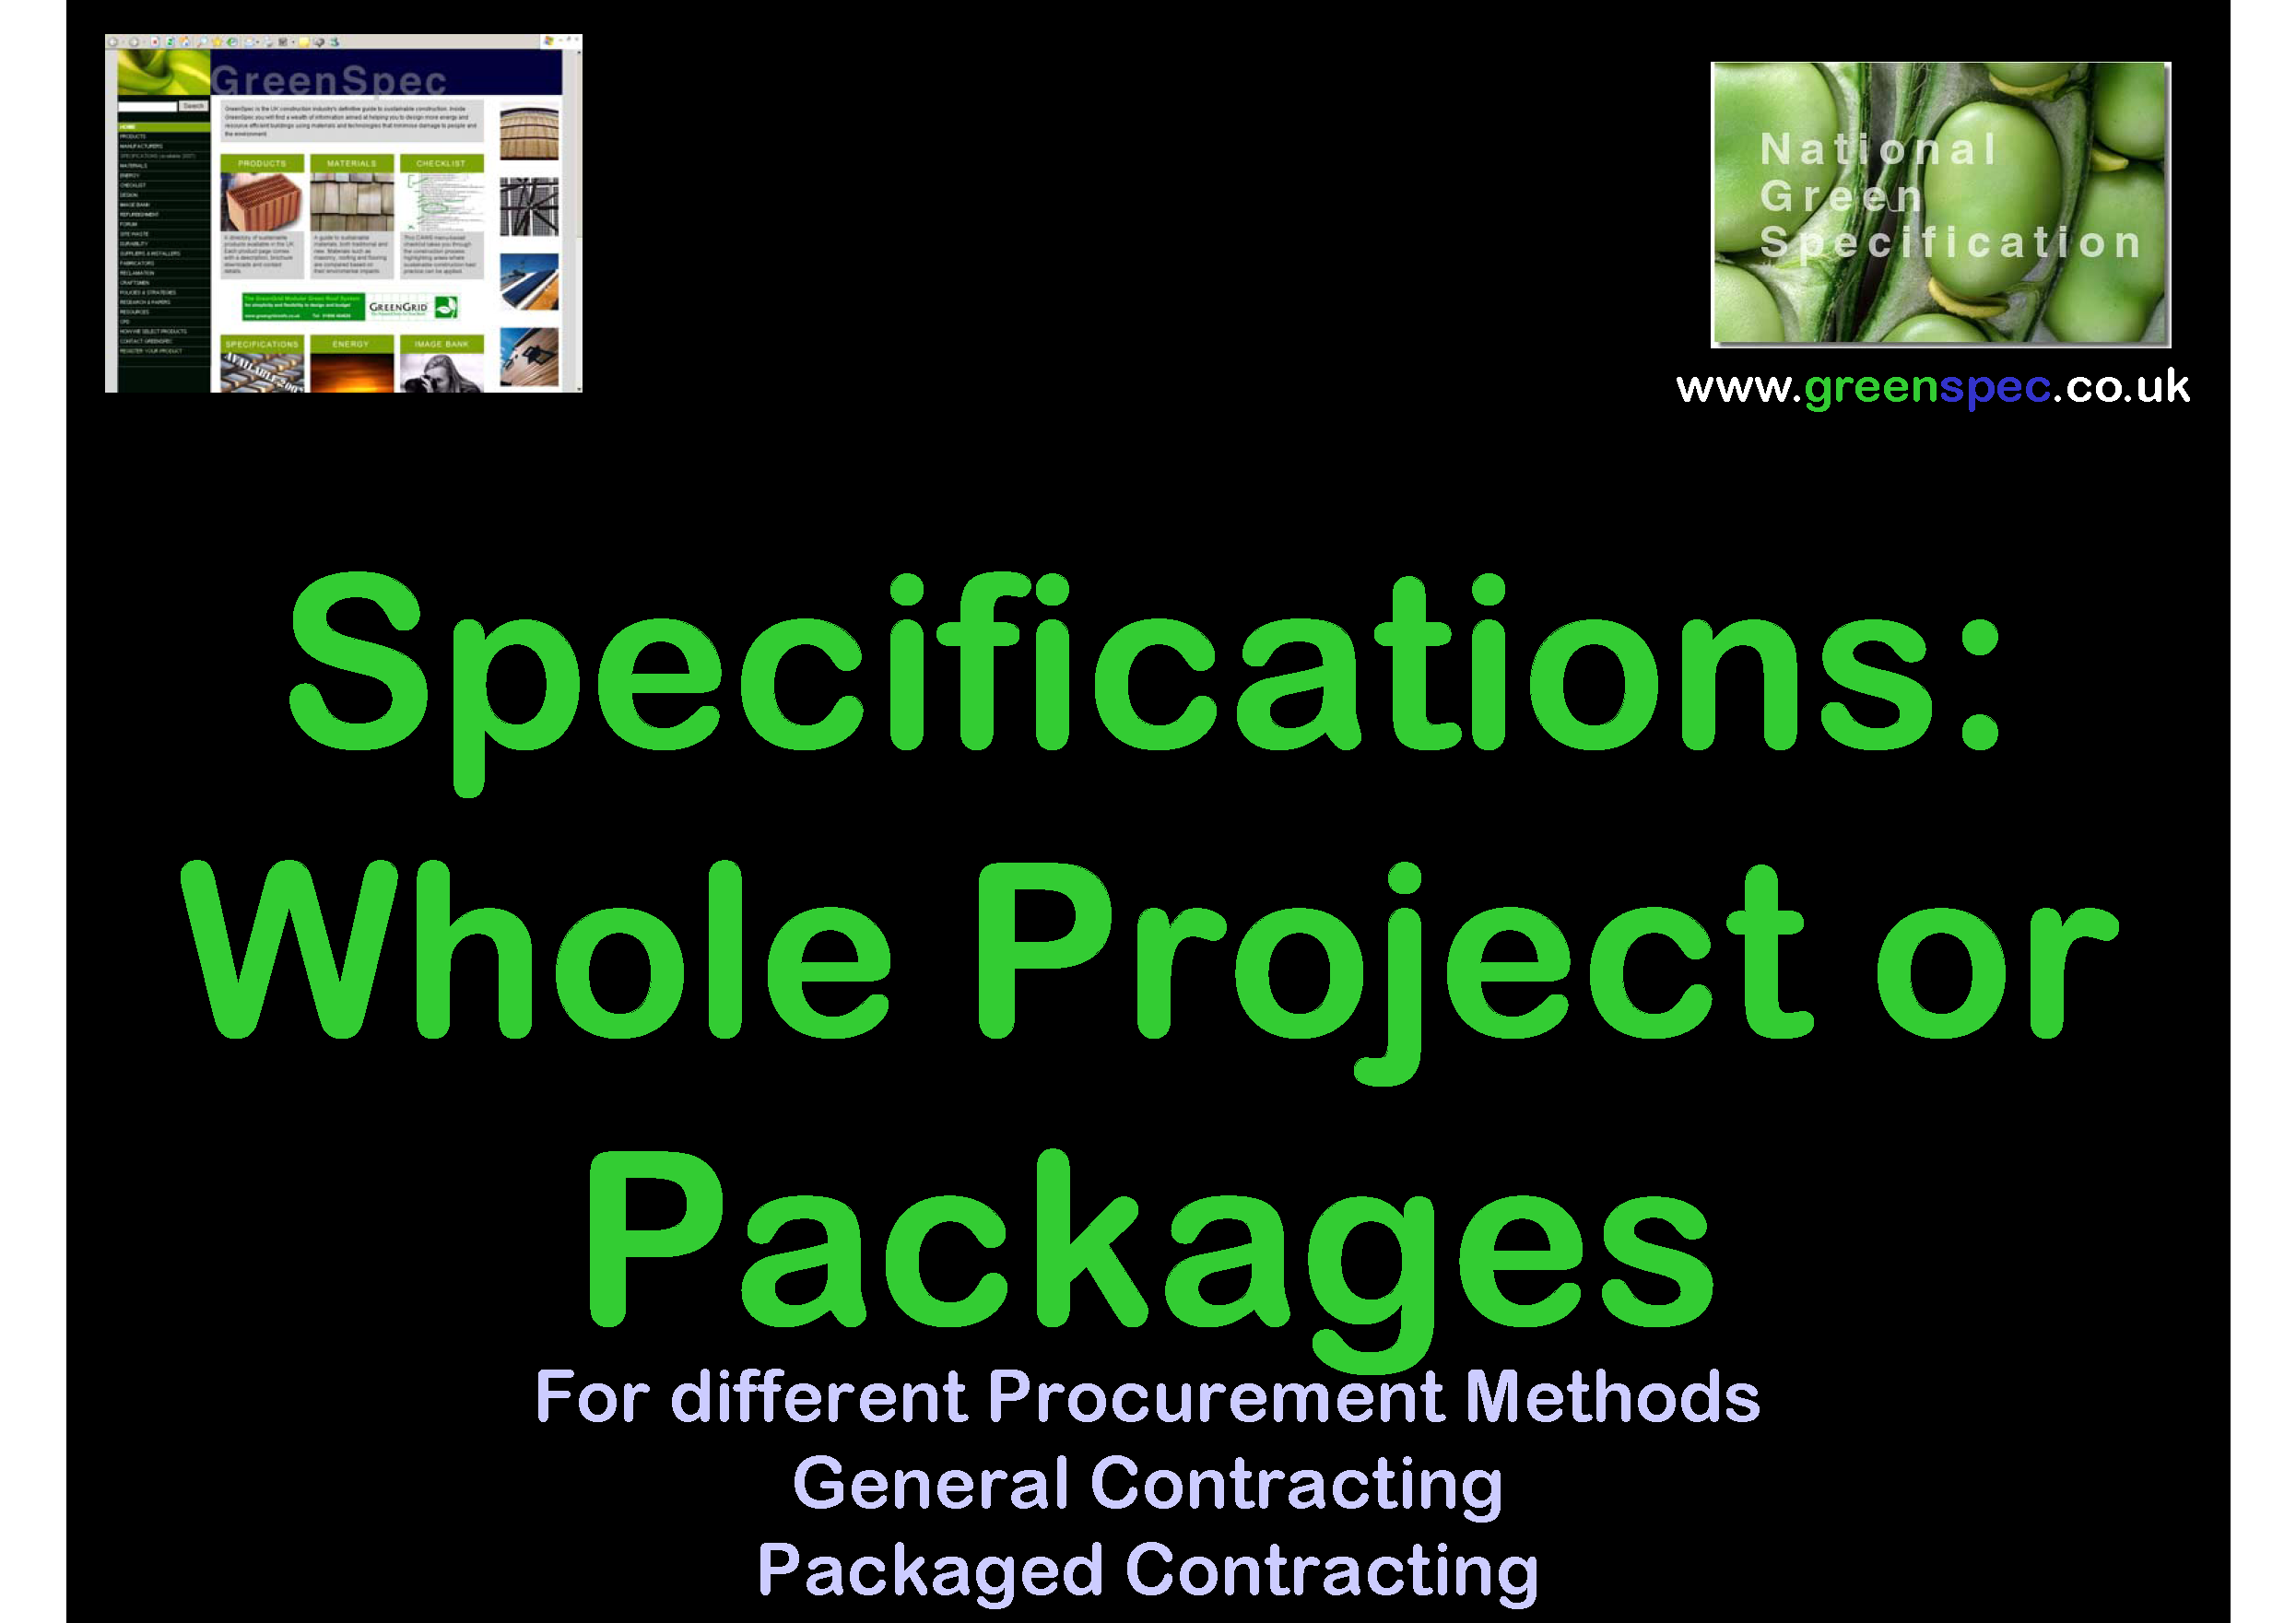 SpecificationWholePackages.png